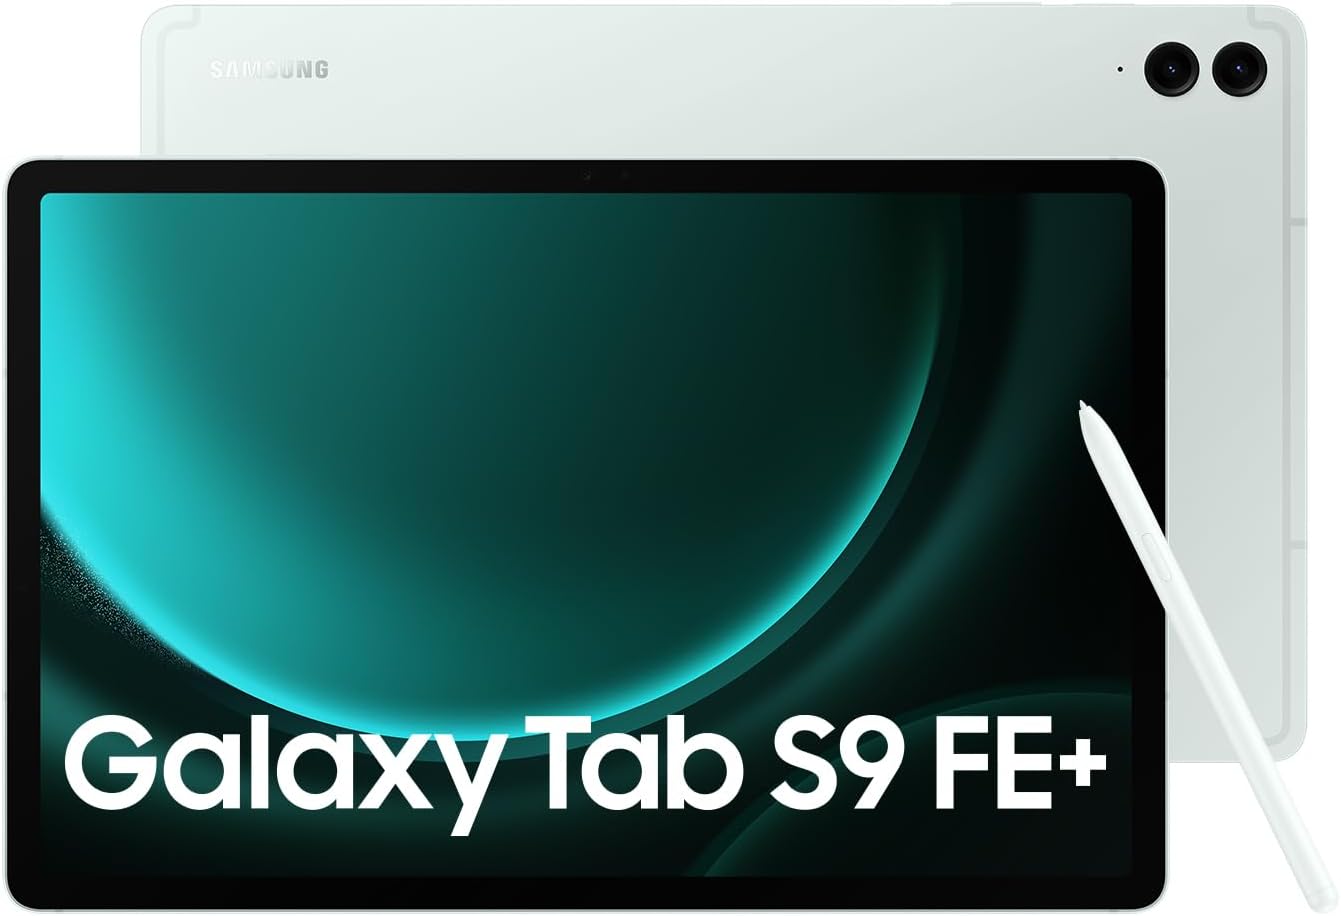 Samsung Galaxy Tab S9 FE+ 12.4 Mint Tablet - Colorful design for creative possibilities and entertainment. 8806095160313